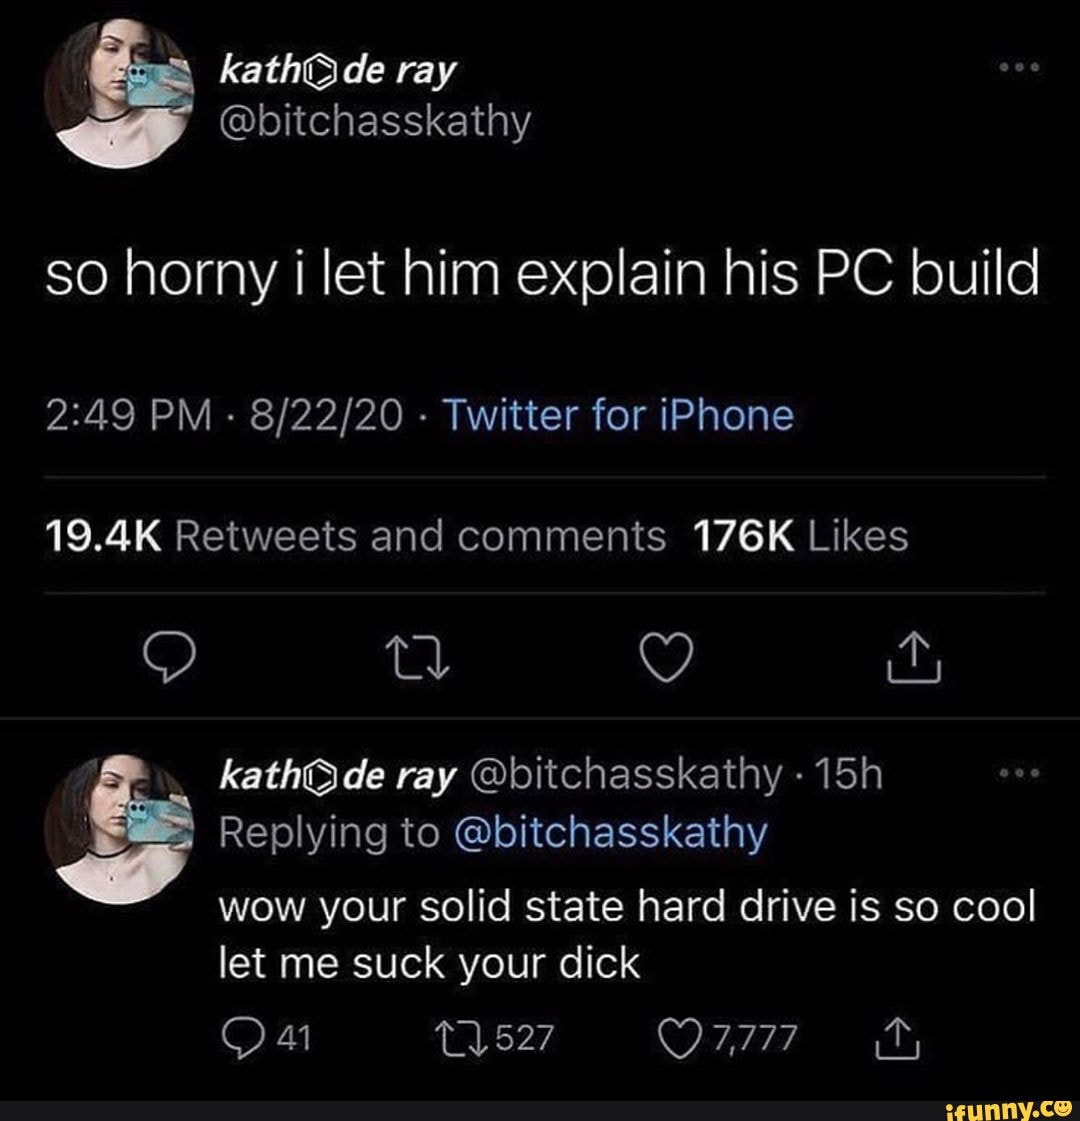 Ce ray @bitchasskathy so horny let him explain his PC build PM ...